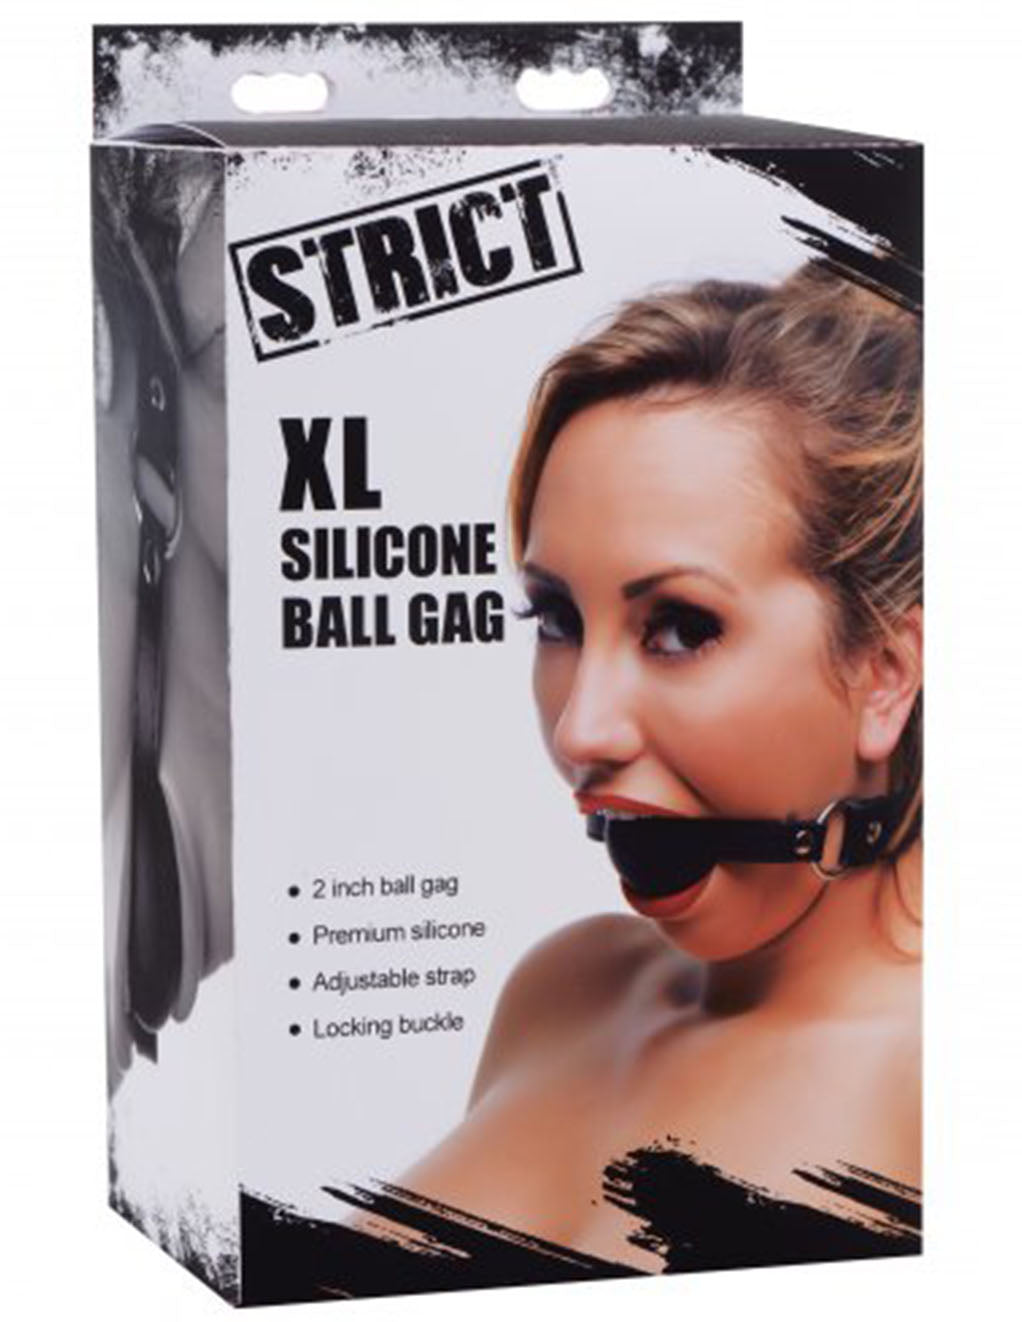 Strict XL Silicone Gag Ball 2 Inch- Package